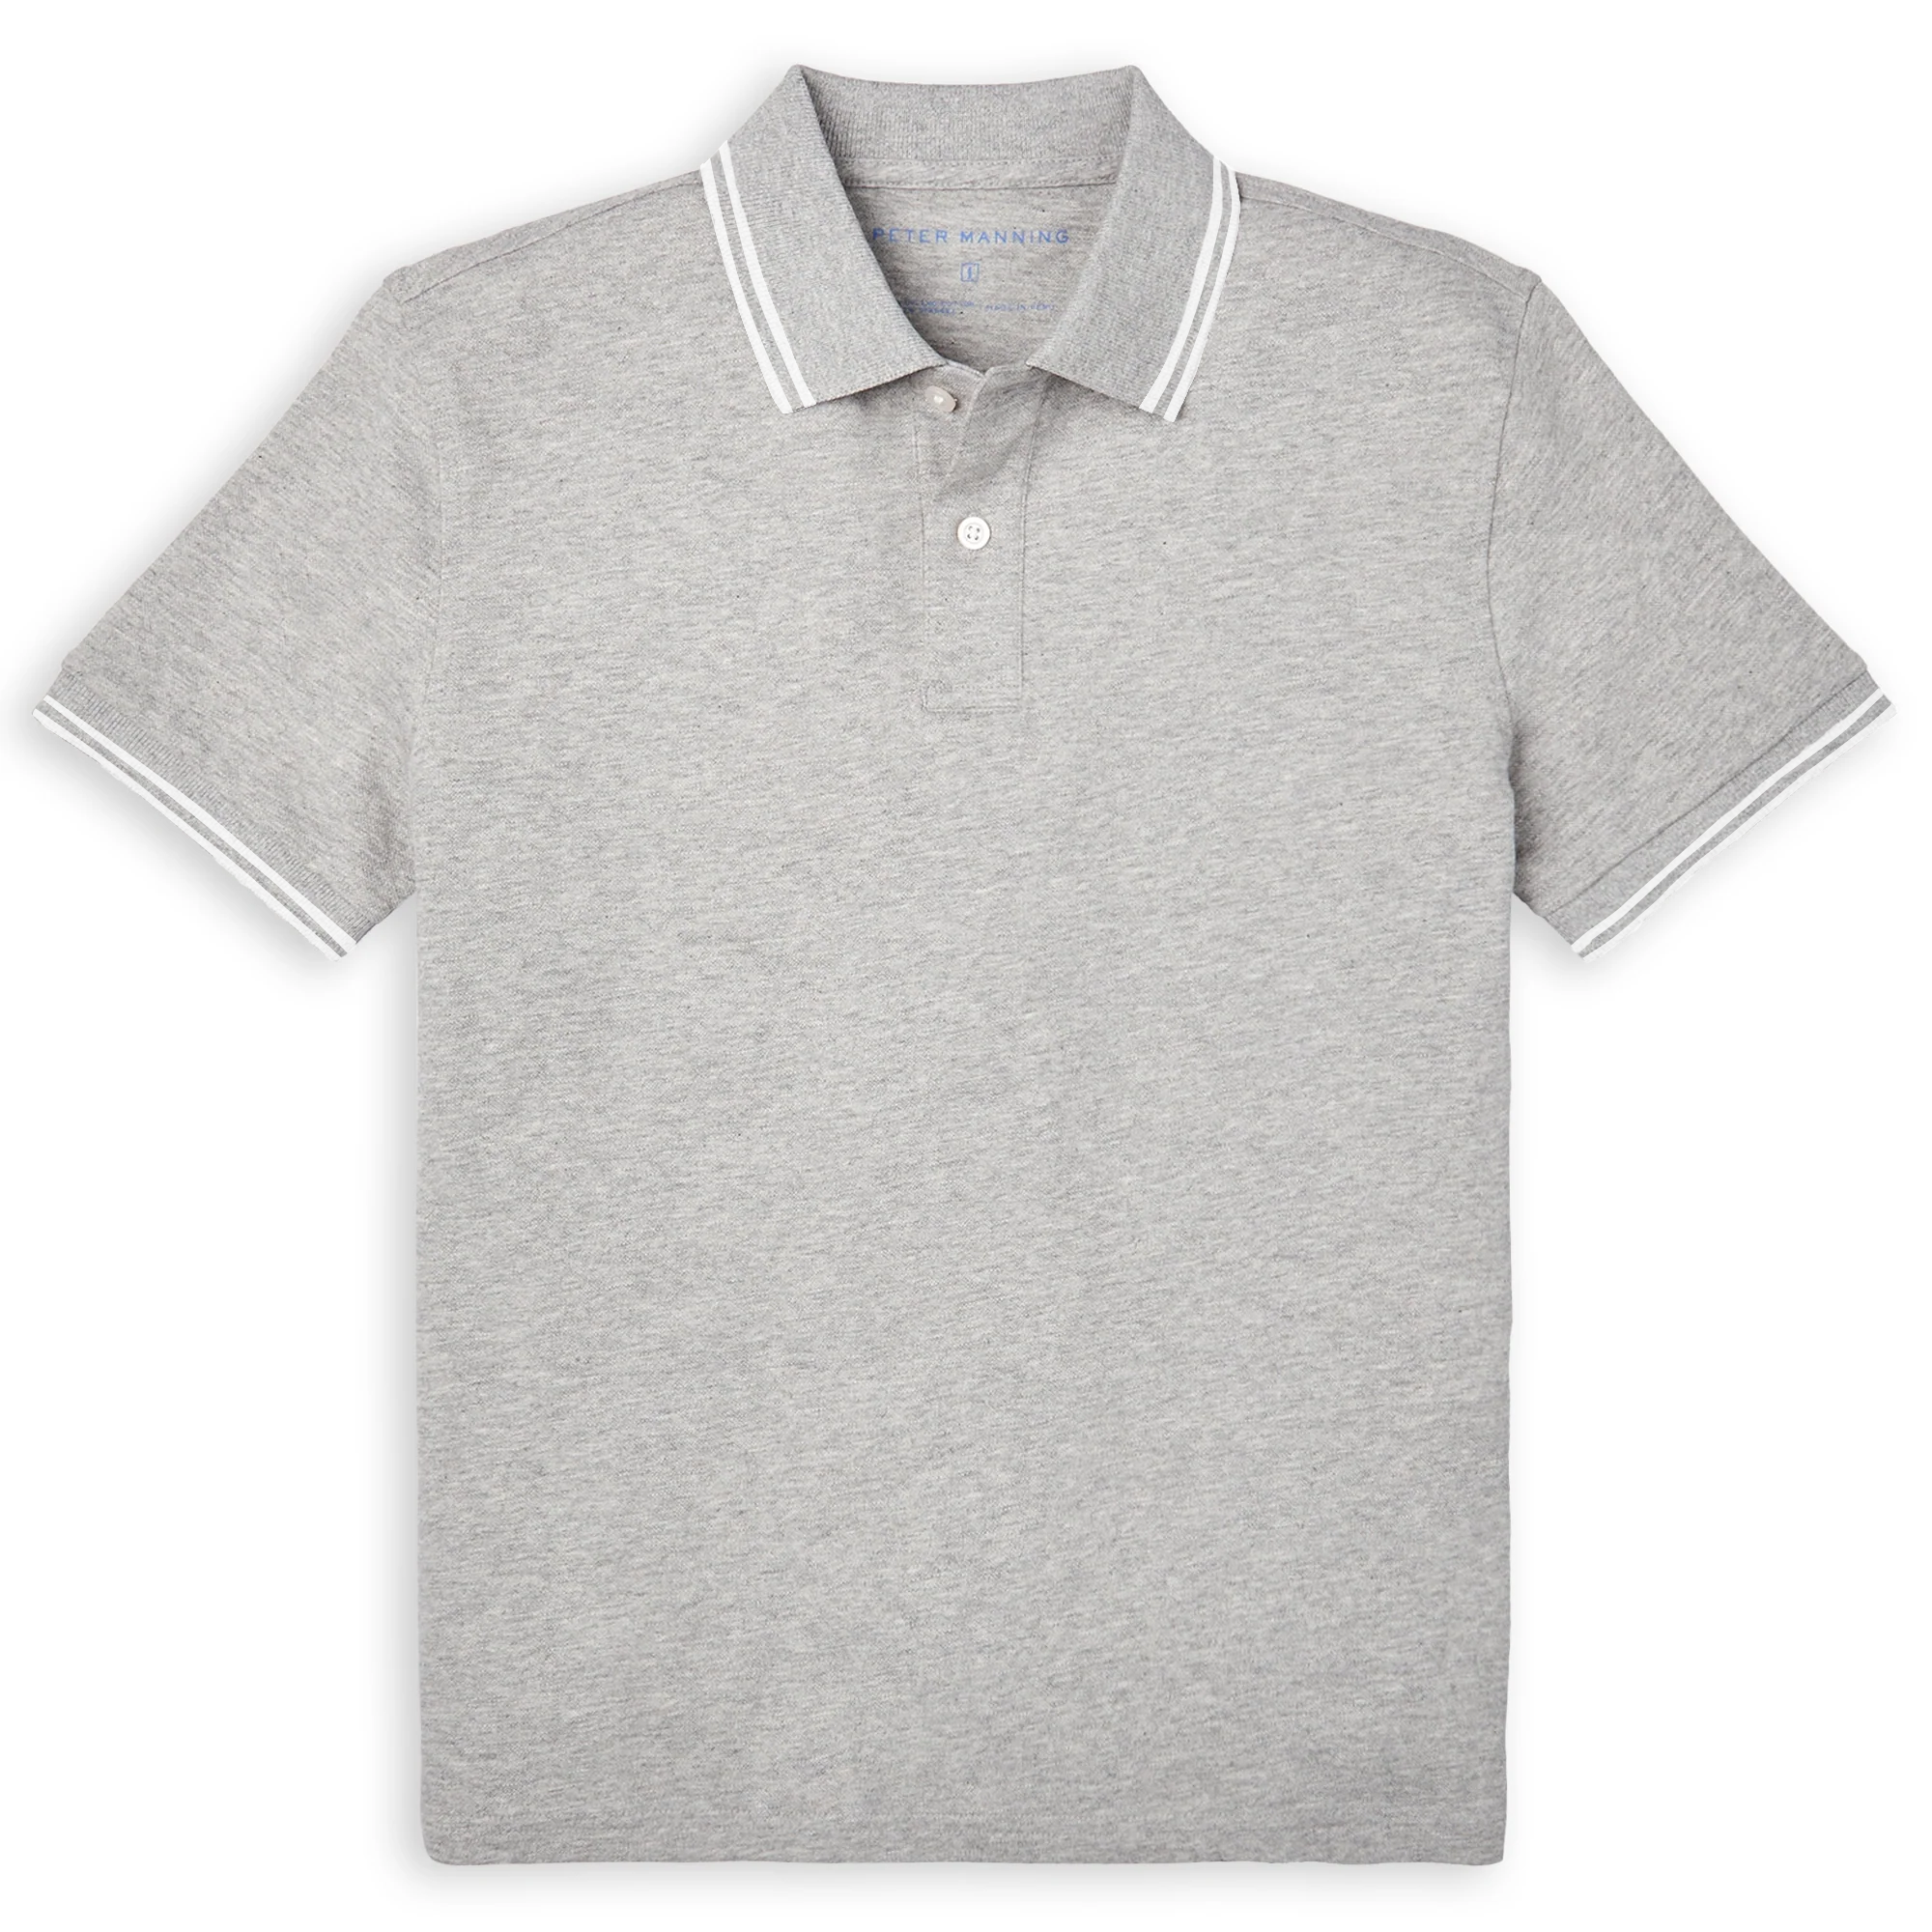 James Polo Shirt - Heather Grey Tipped